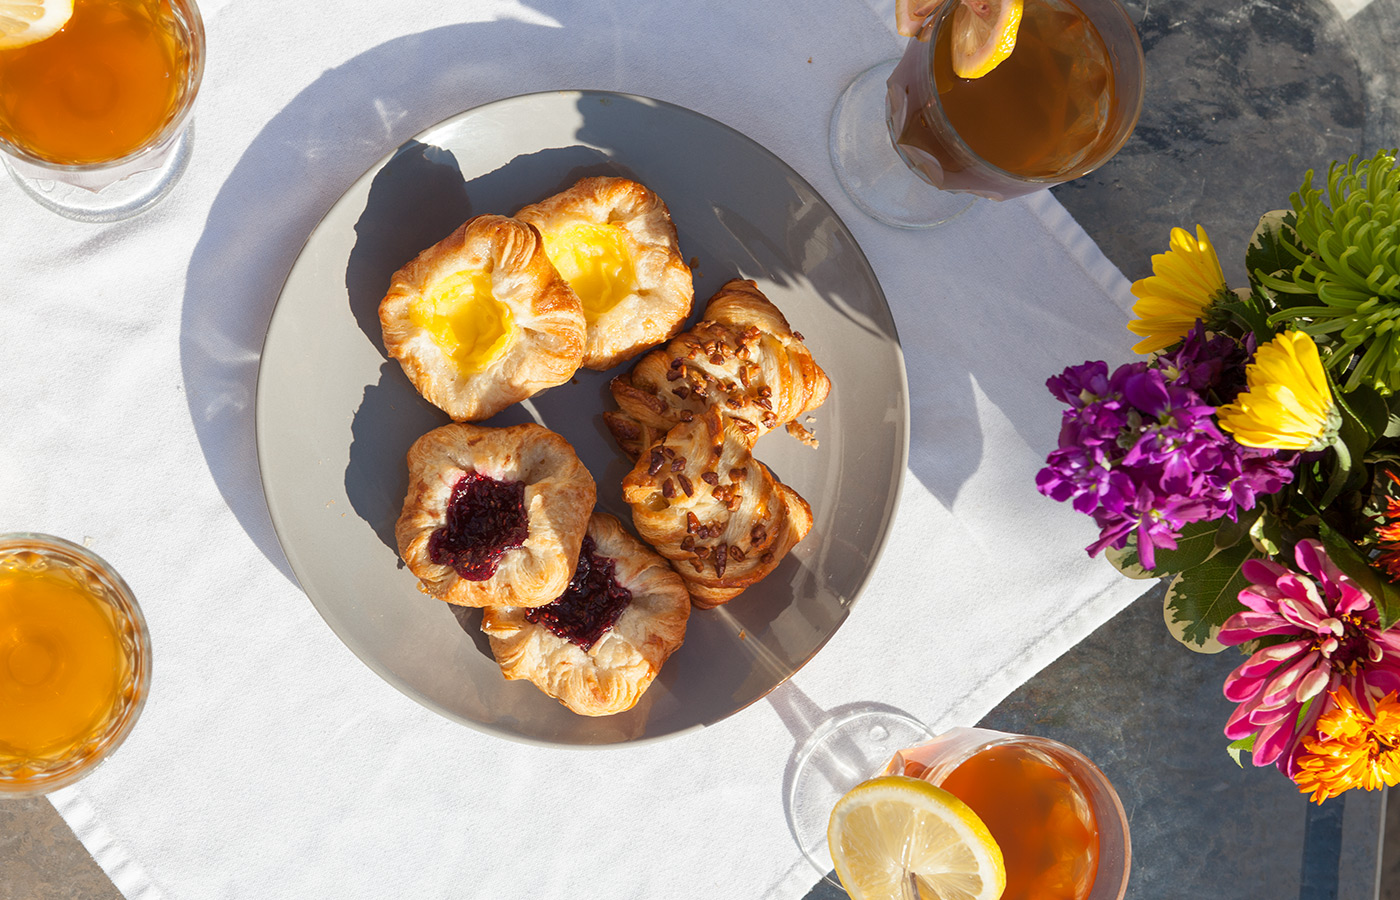 table with a plate of pastries and purple and orange flowers 